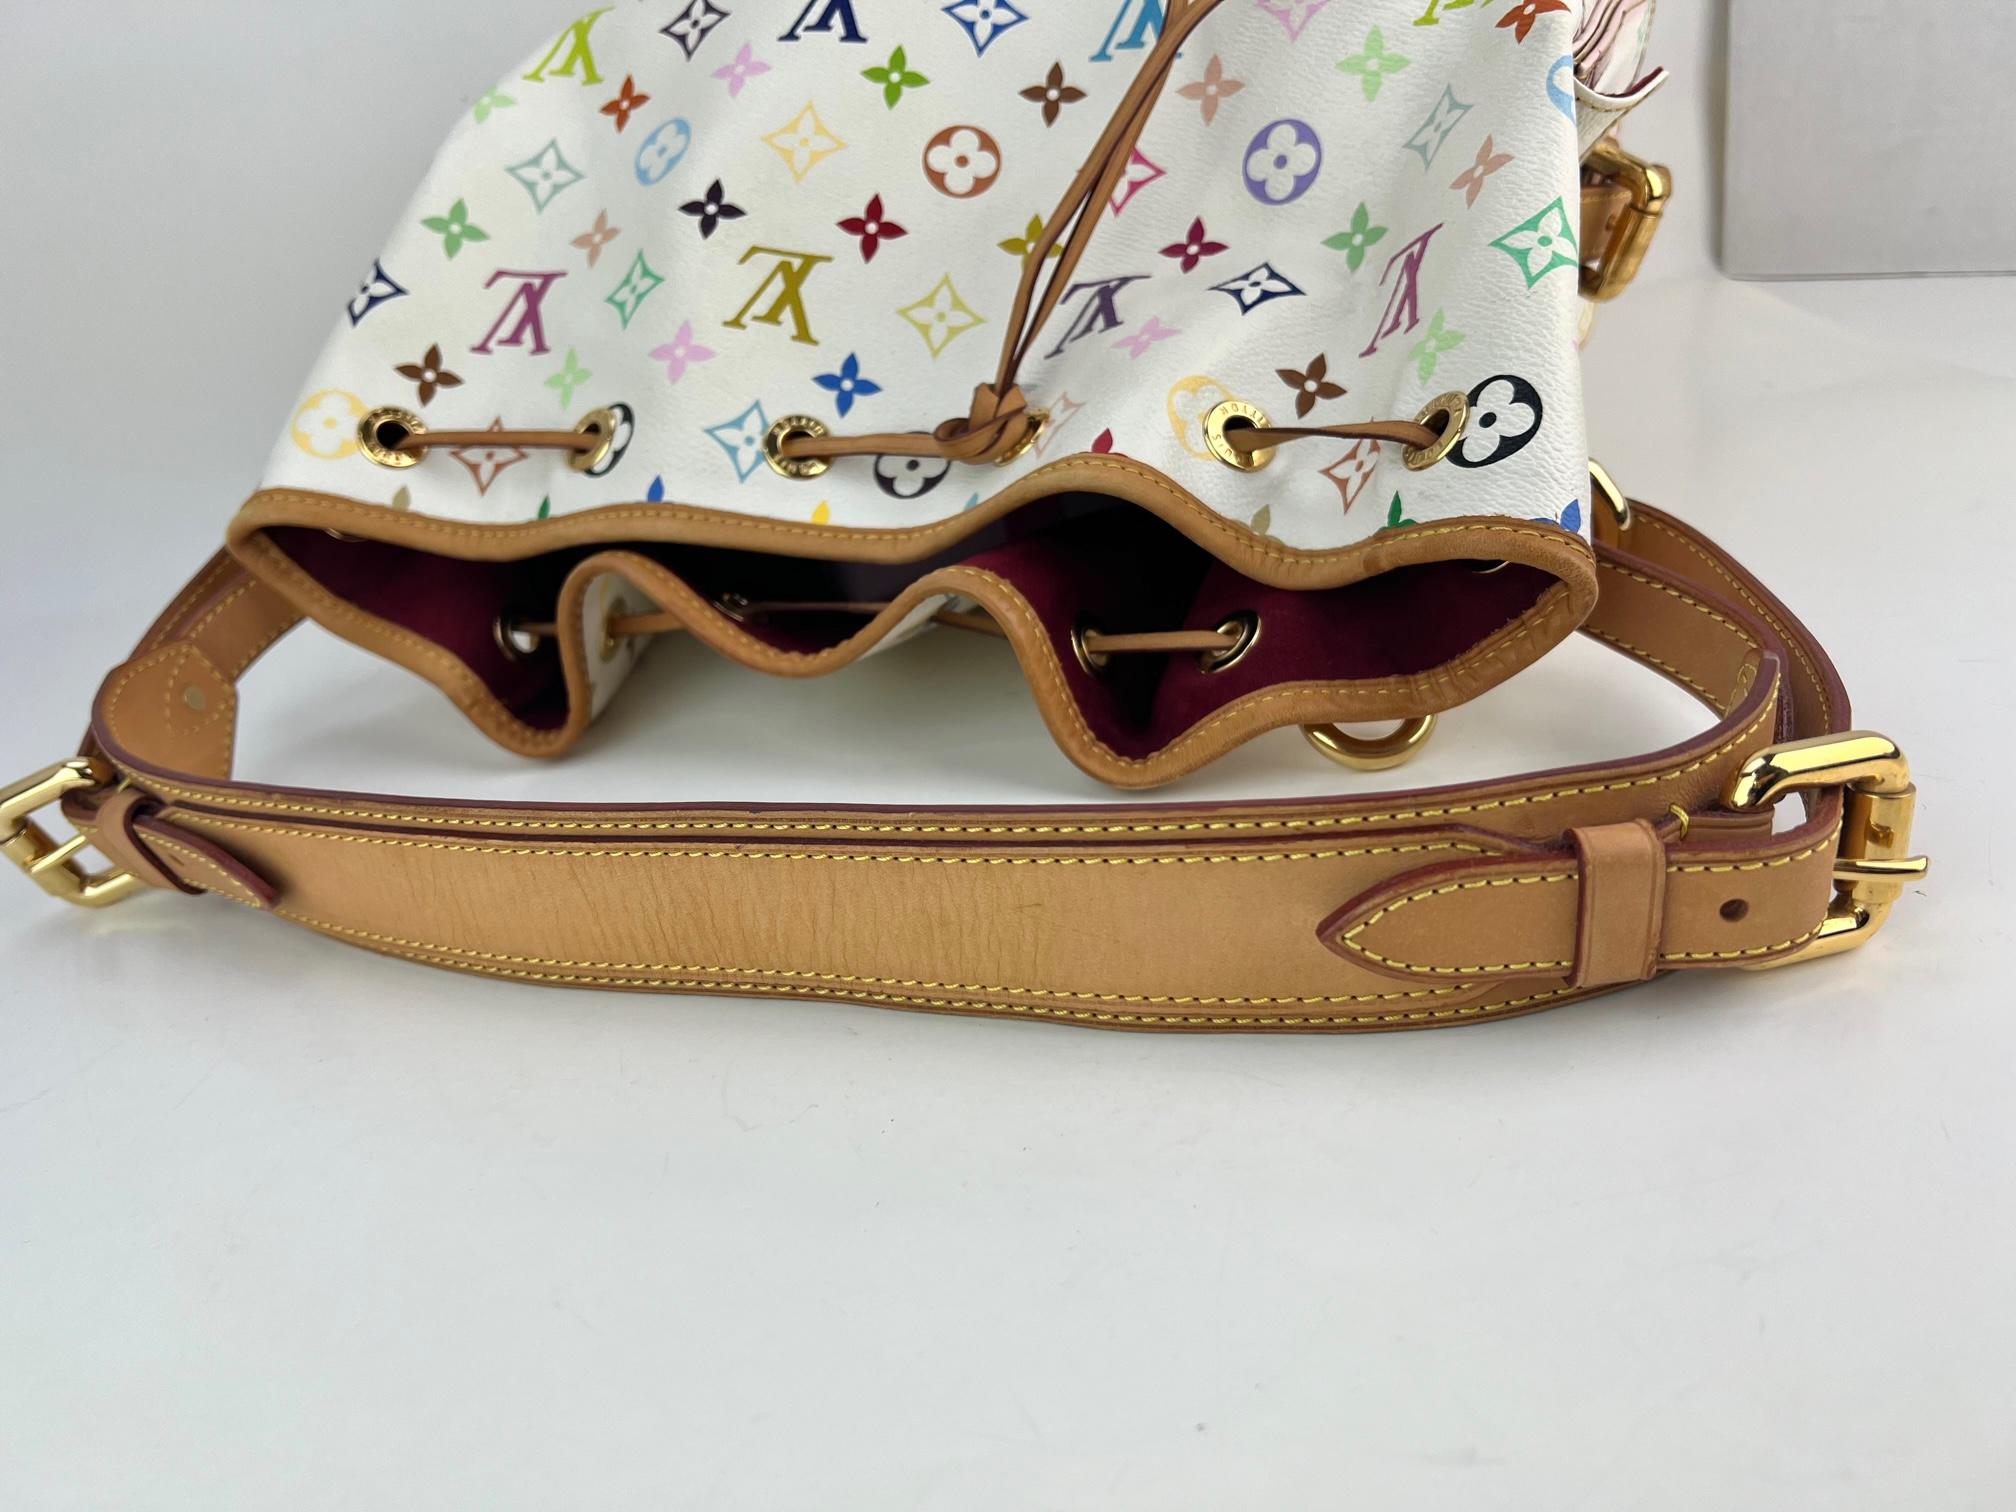 Pre-Owned 100% Authentic
LOUIS VUITTON Petit Noe White Multicolor Bucket Bag
RATING: B...Very Good, well maintained,
shows minor signs of wear
MATERIAL: multicolor monogram canvas
LEATHER PIPING: around top has wrinkling,
has faint marks
HANDLE: